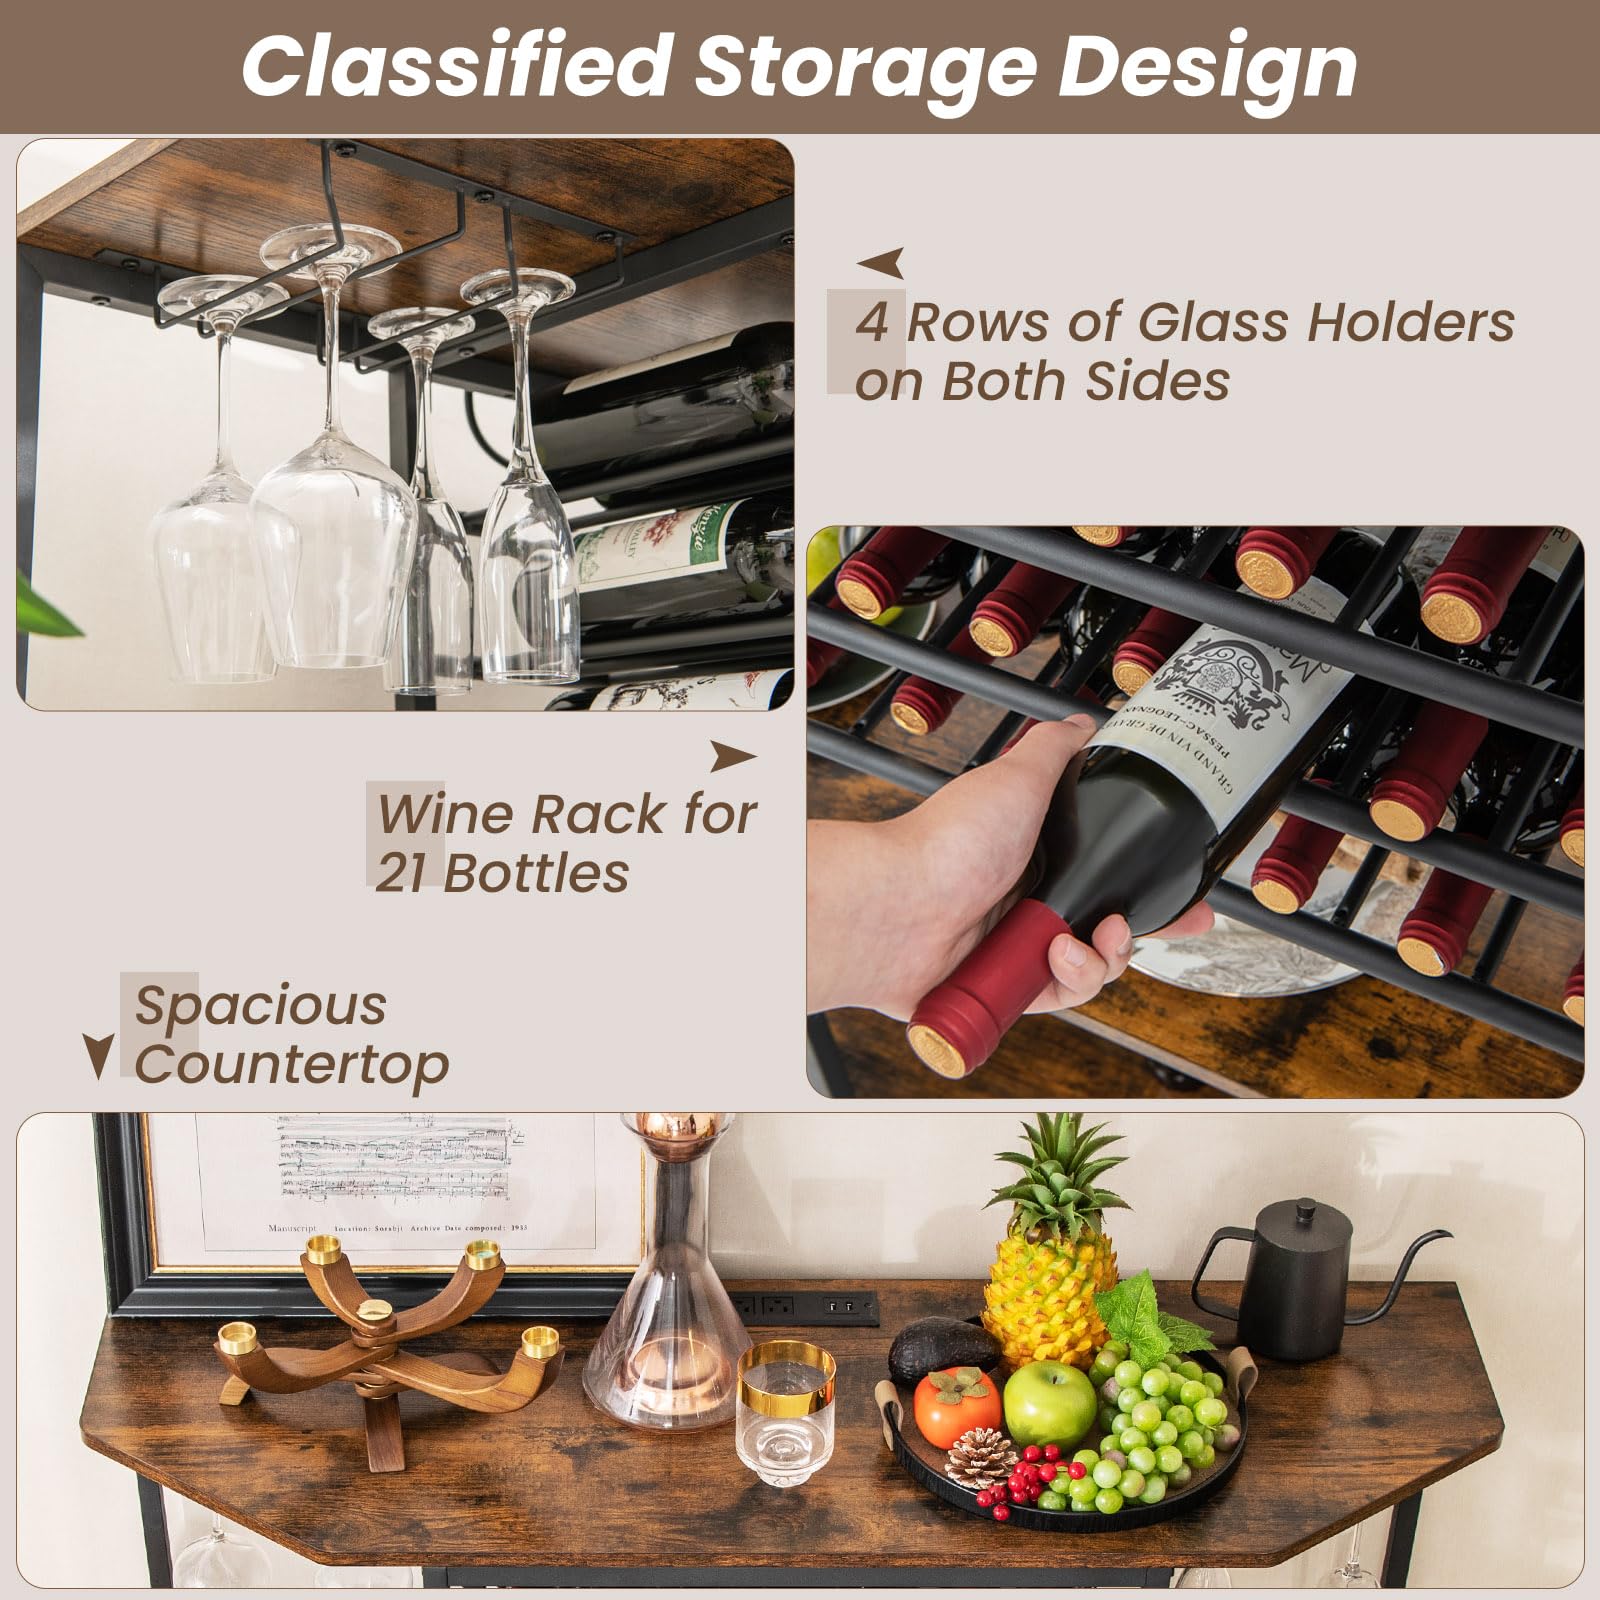 Giantex Wine Bar Cabinet with Power Outlet, Mini Coffee Bar Stand Table with 21 Bottle Wine Rack & Glass Holders